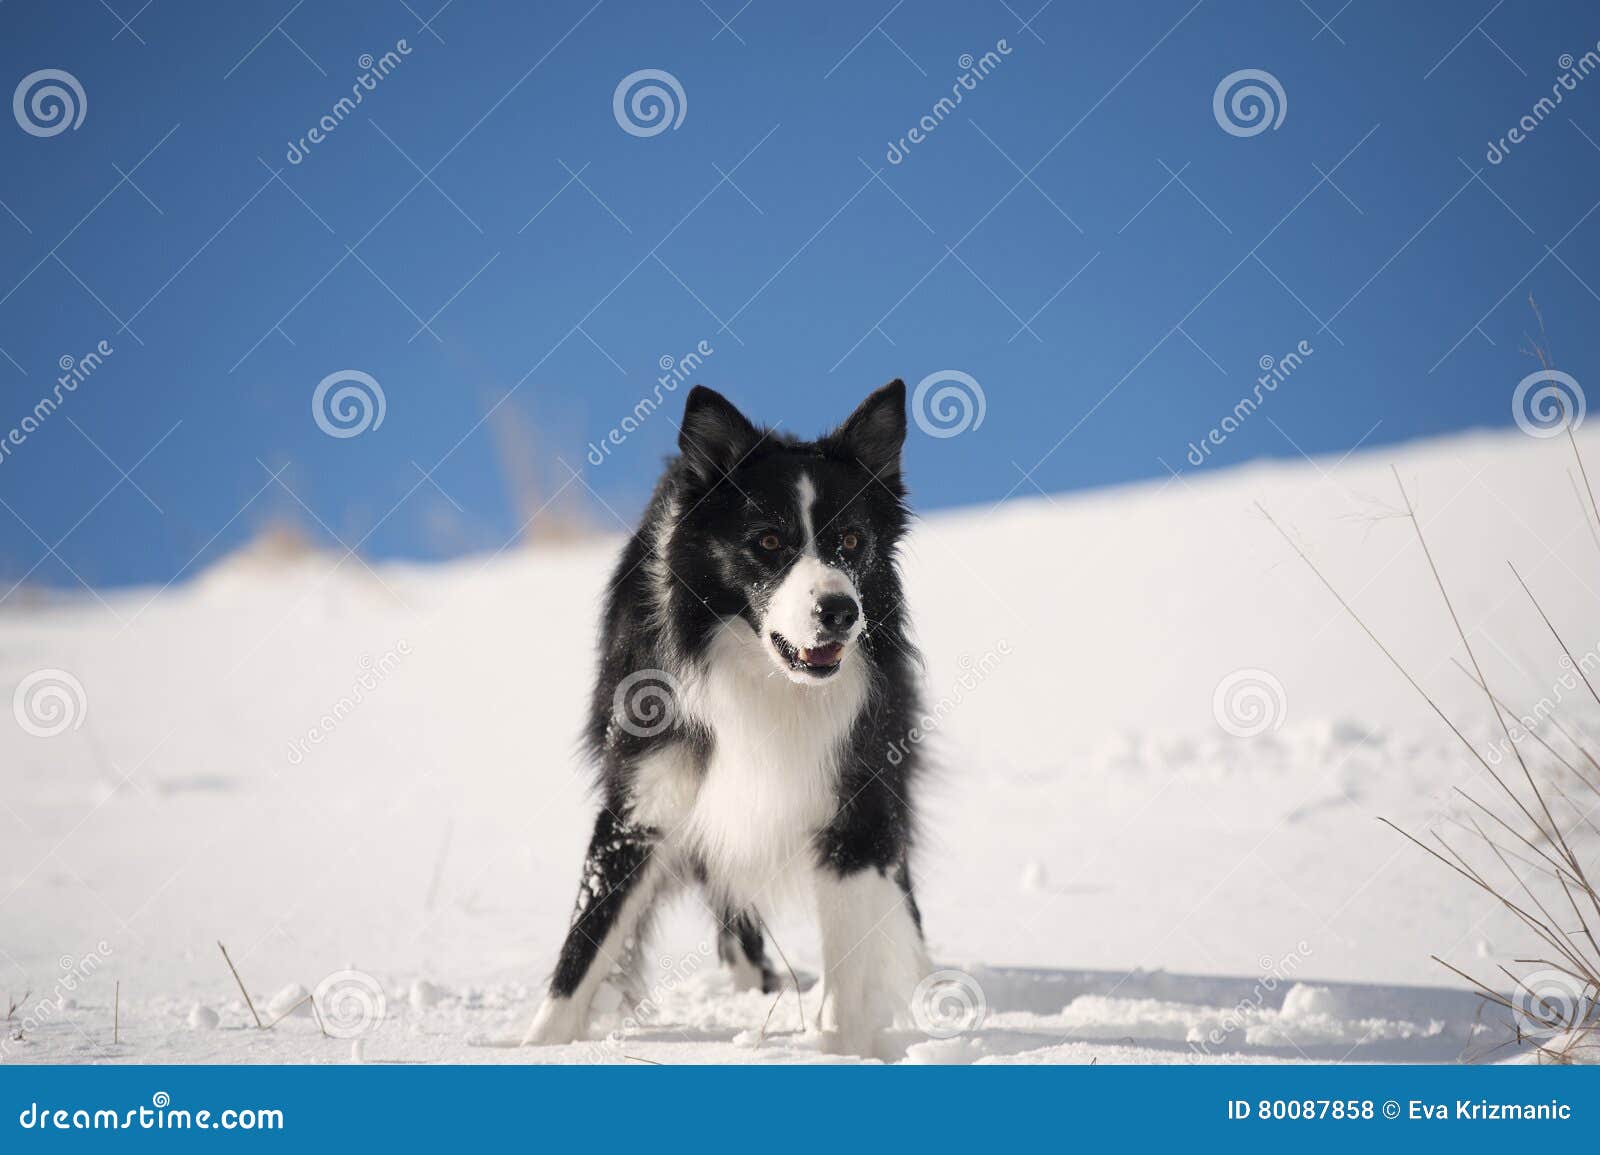 border collie waiting for a command in snow